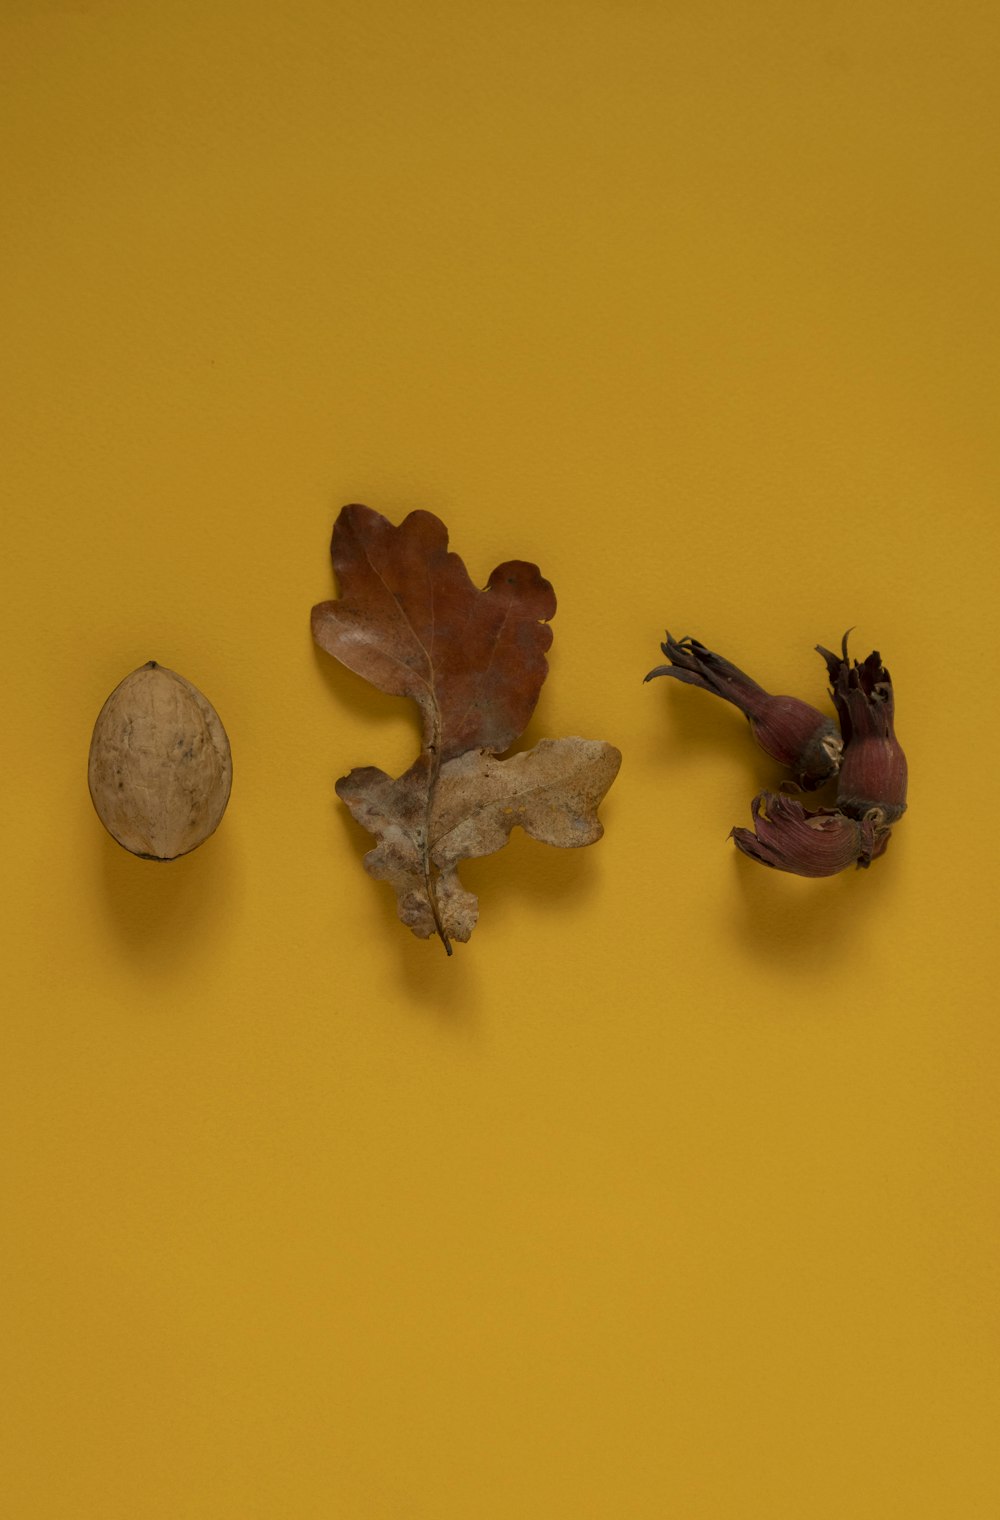 three different types of leaves and nuts on a yellow background